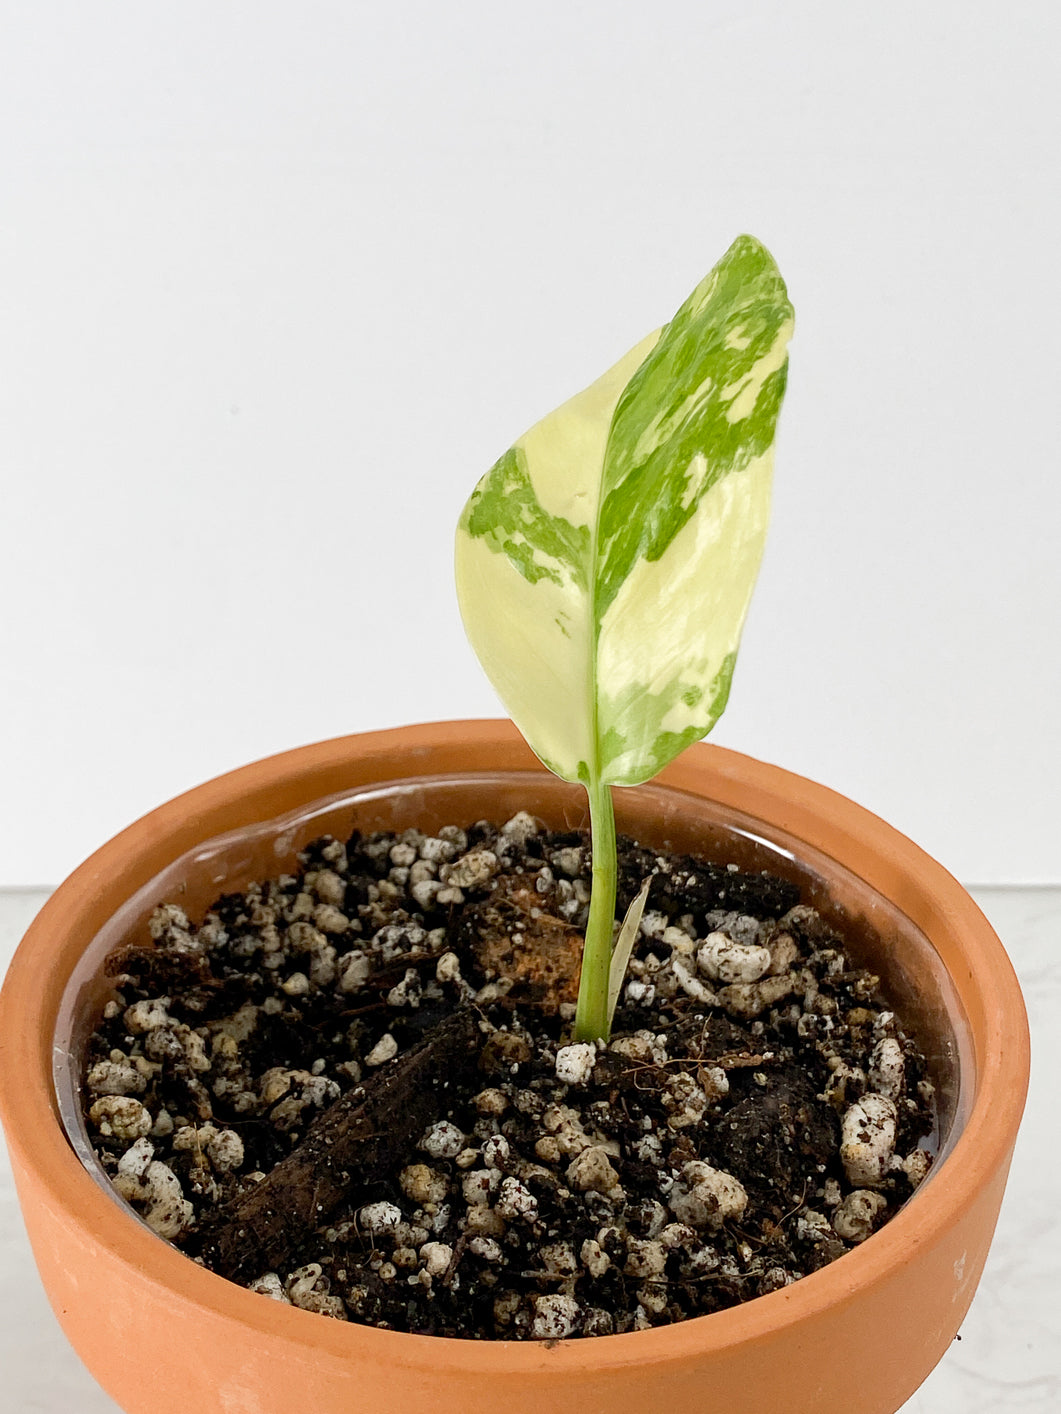 Monstera Lechelriana variegated  Rooted 1 leaf 1 sprout